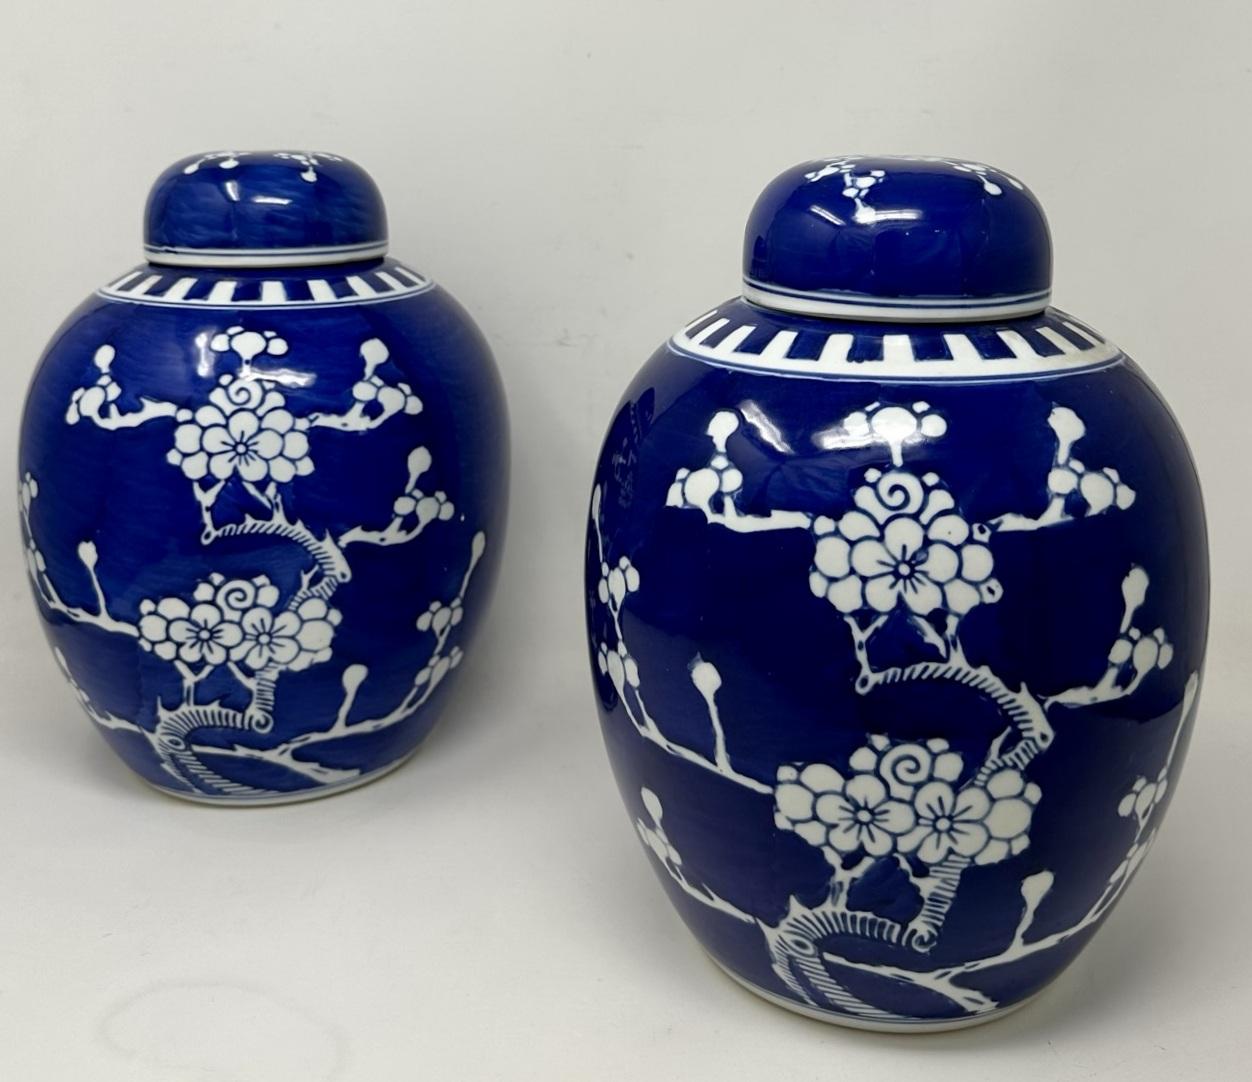 Stylish identical Pair of Early Chinese Export quite large Ginger Jars, early to mod Twentieth Century, complete with their original covers. 

Each Jar hand painted in underglaze blue on an off-white ground, decoration depicts branches of Prunus